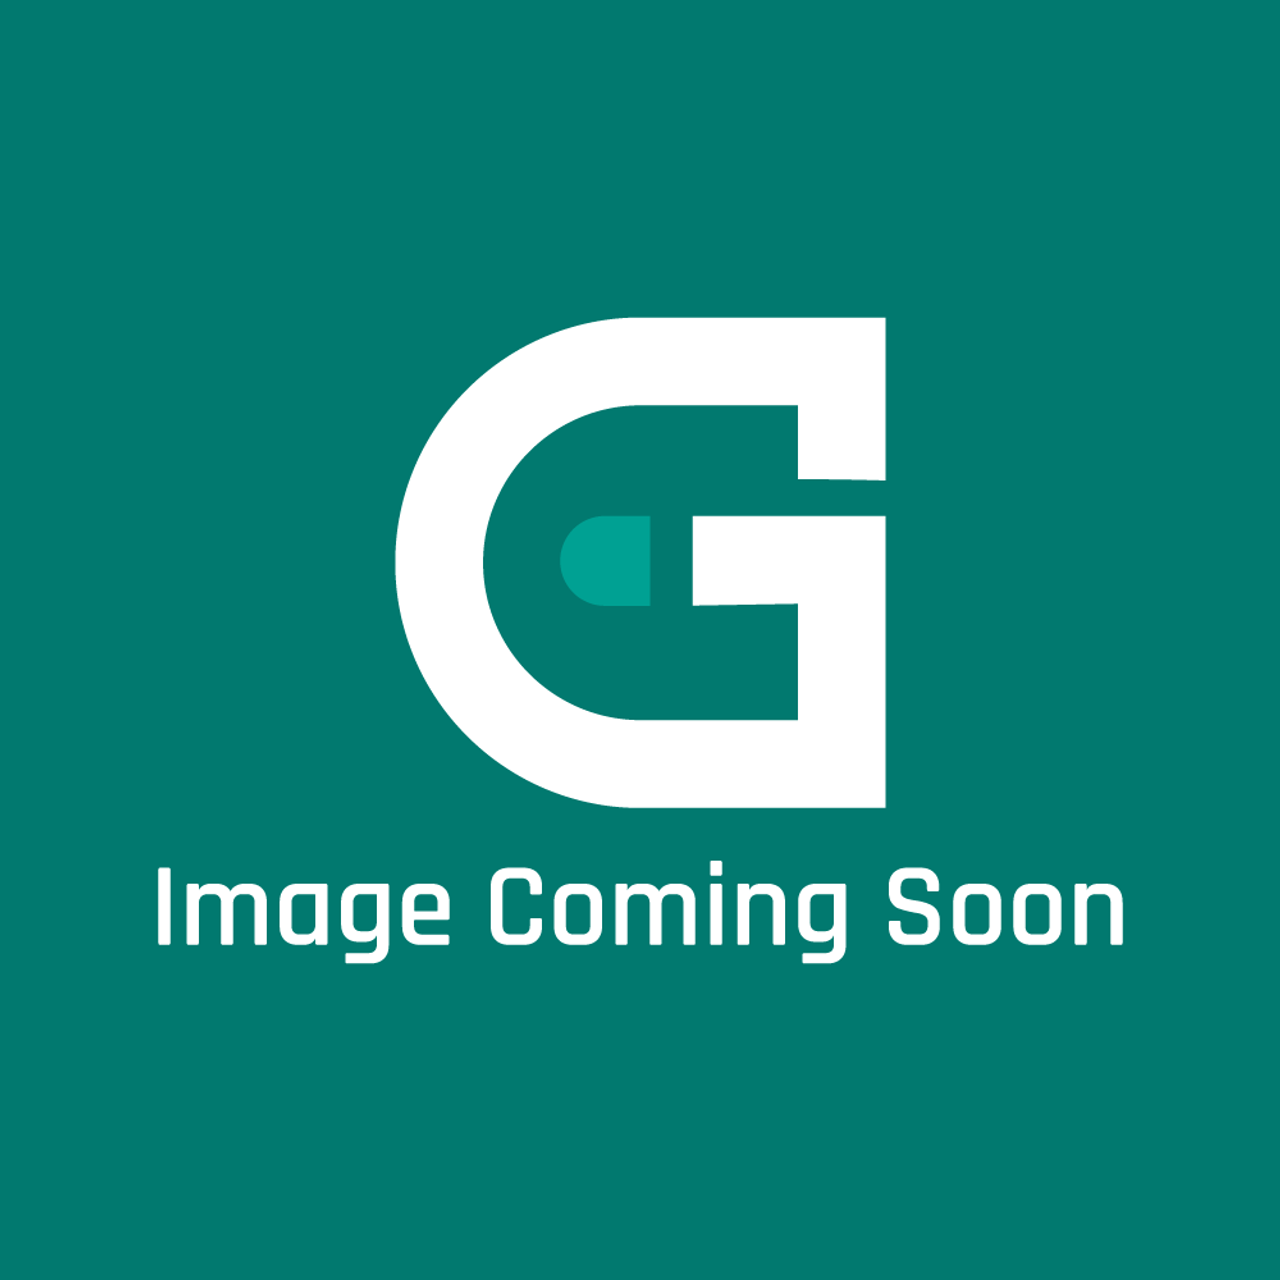 Frigidaire - Electrolux 316577084 Controller - Image Coming Soon!